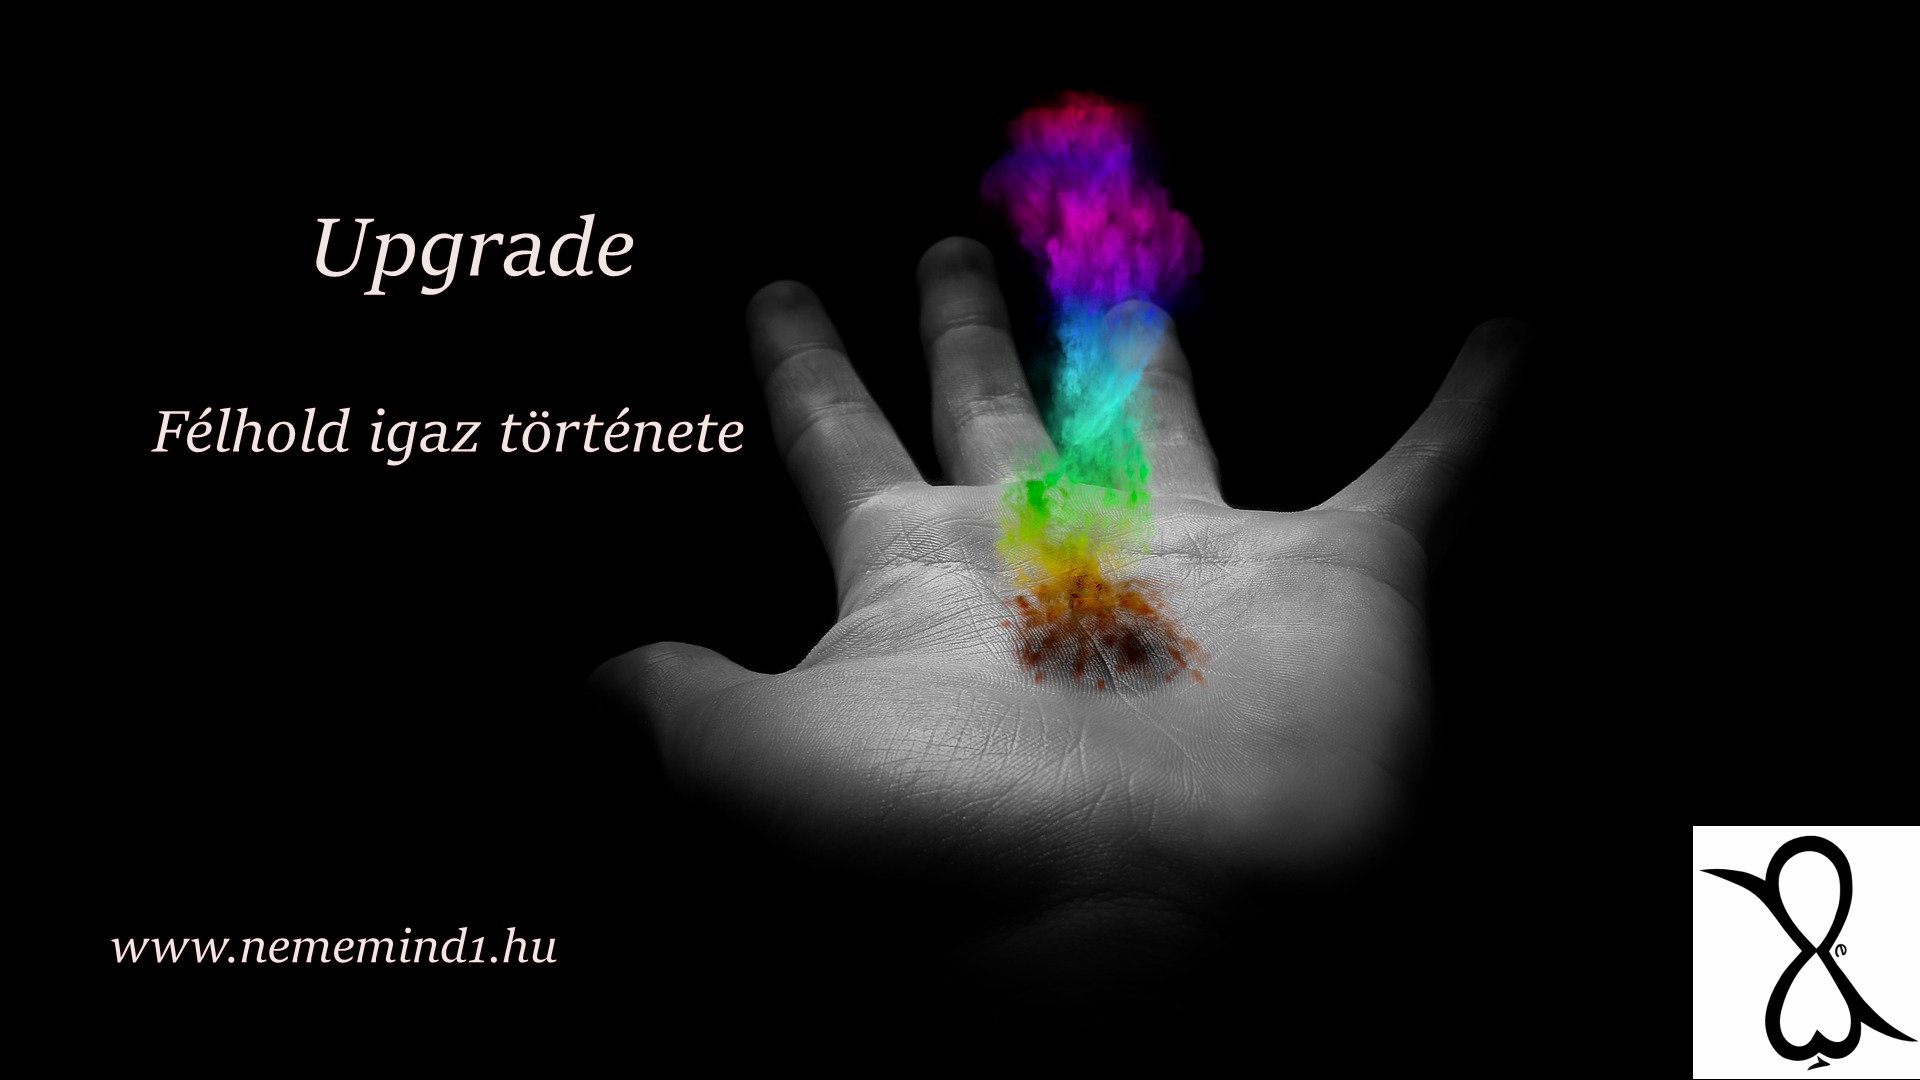 You are currently viewing Upgrade (Félhold igaz története)